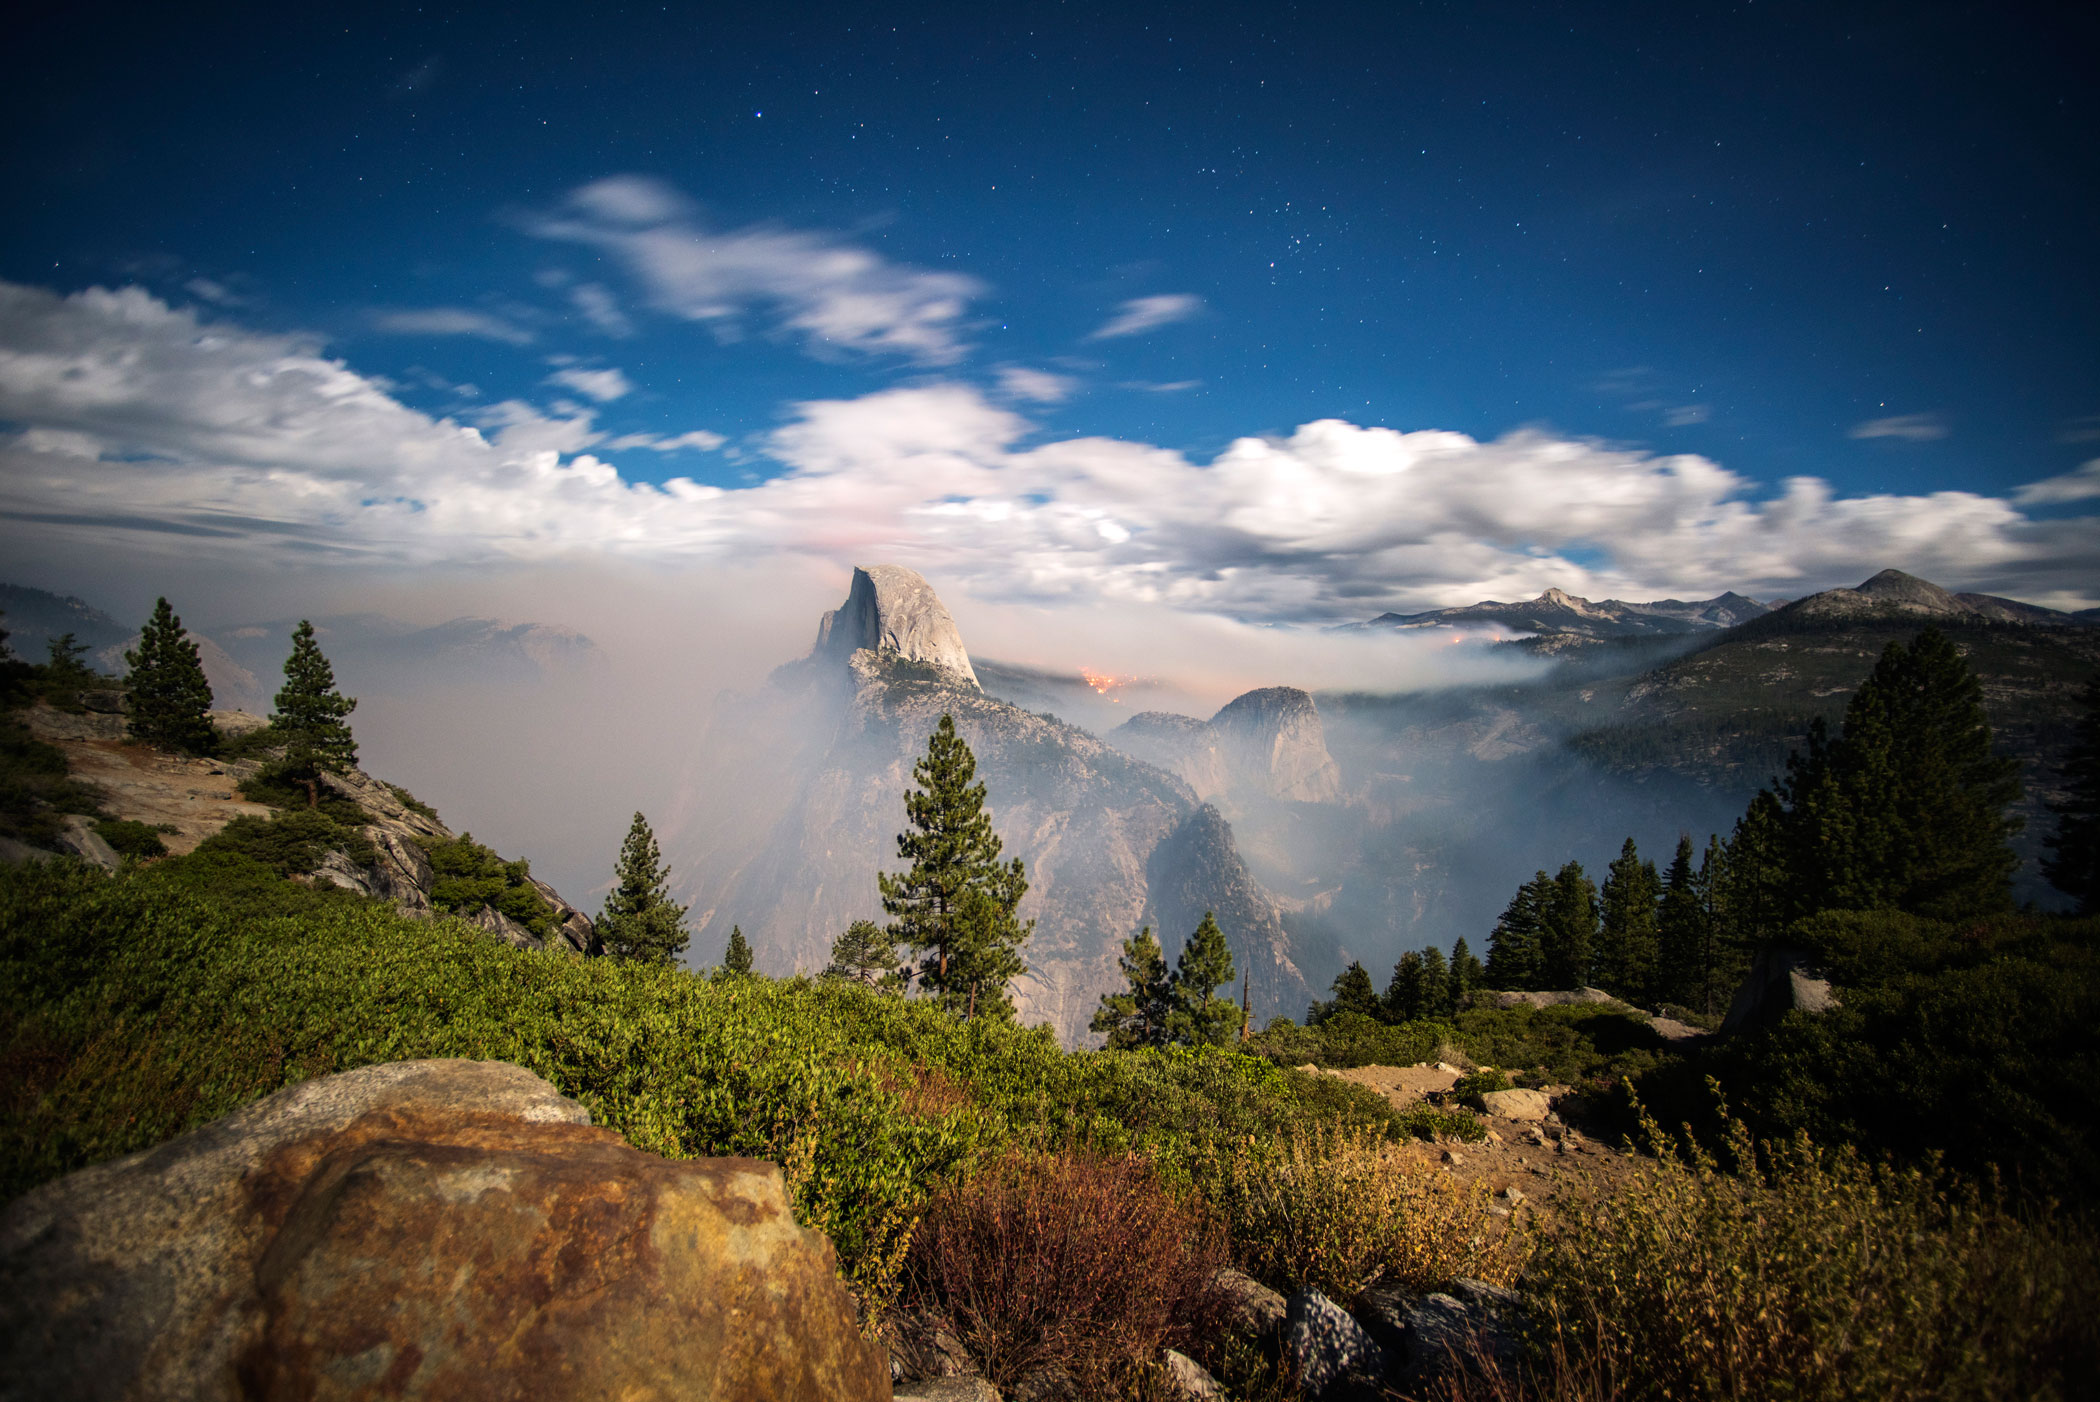 The Meadow Fire burns overnight near Half Dome in Yosemite National Park early Monday September 8, 2014. As of Wednesday the fire had burned over 4,500 acres and was 10% contained.